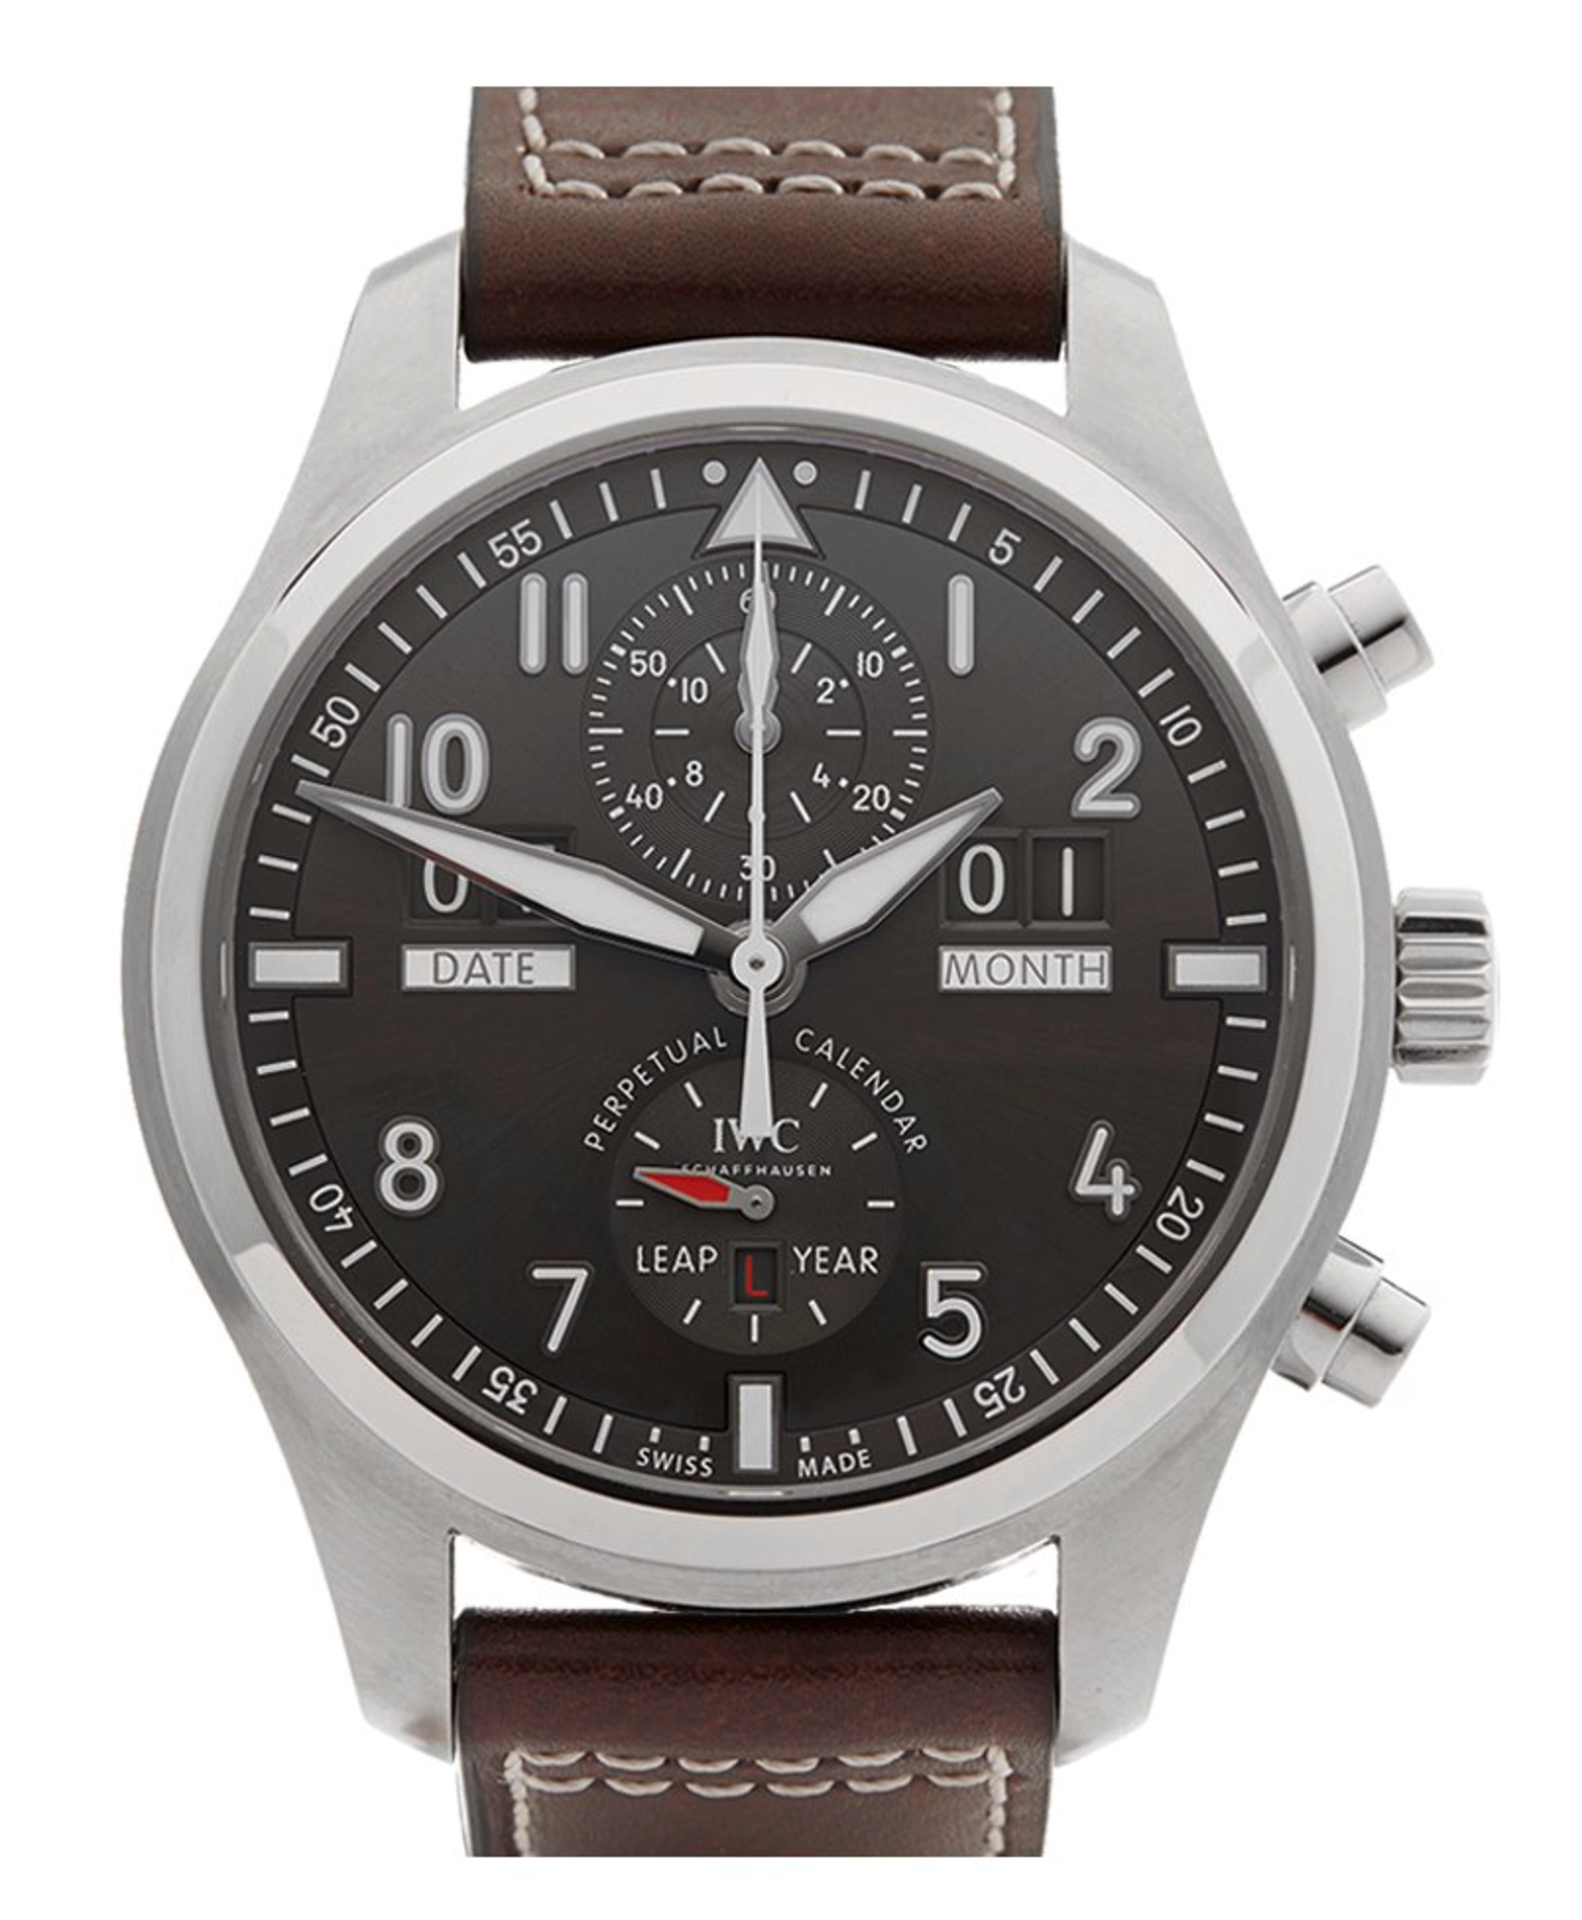 IWC Pilot's Perpetual Calendar 46mm Stainless Steel - IW379108 - Image 8 of 8